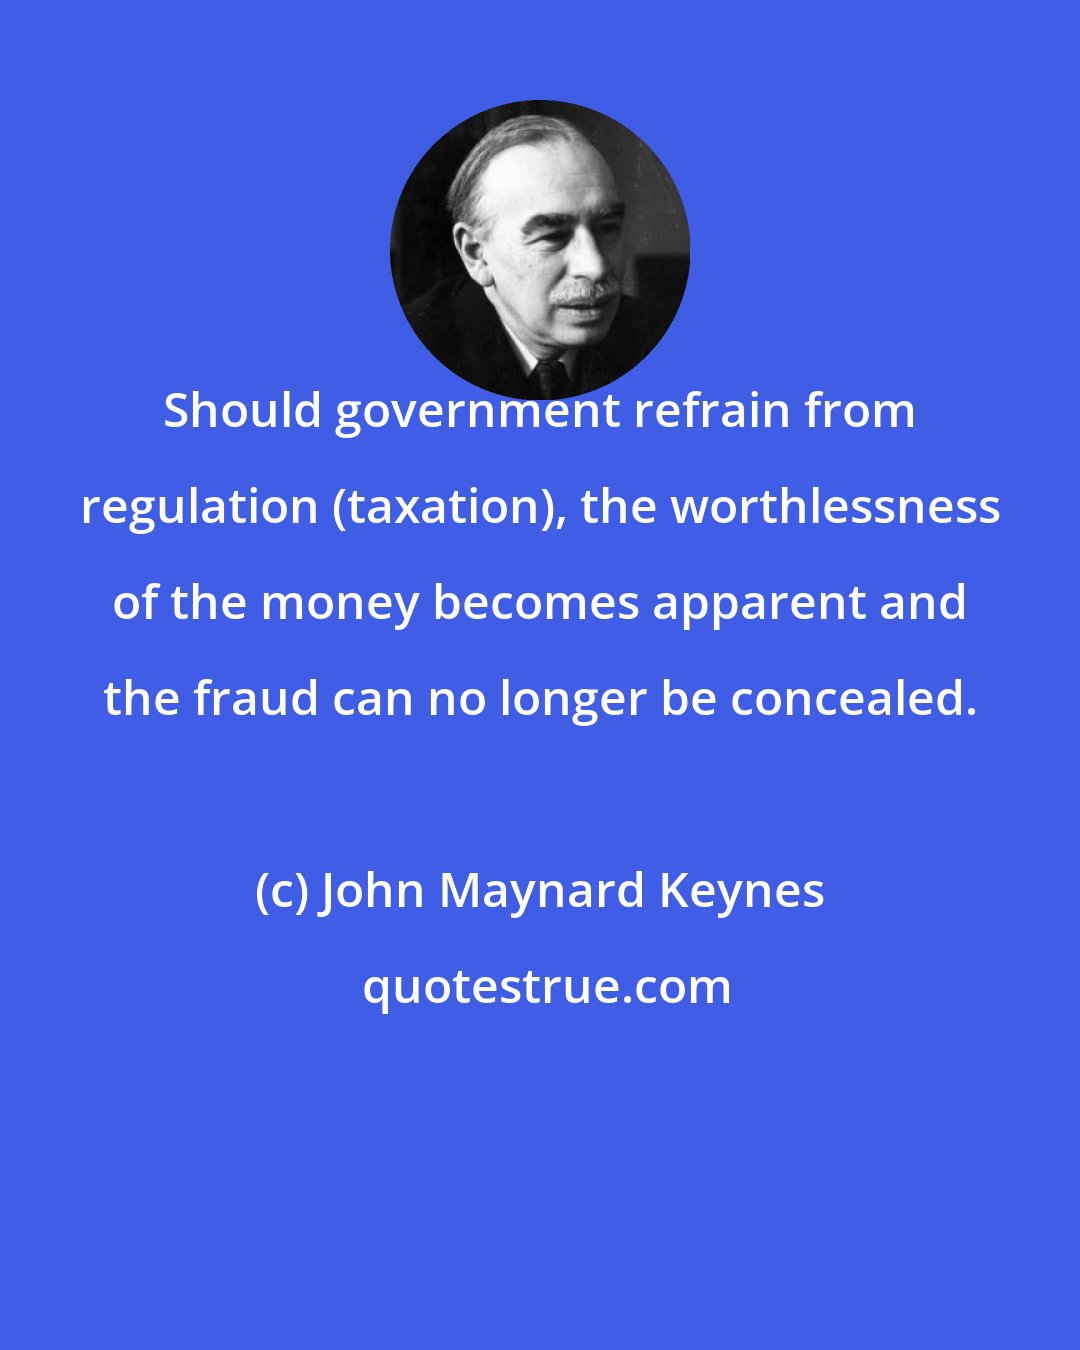 John Maynard Keynes: Should government refrain from regulation (taxation), the worthlessness of the money becomes apparent and the fraud can no longer be concealed.